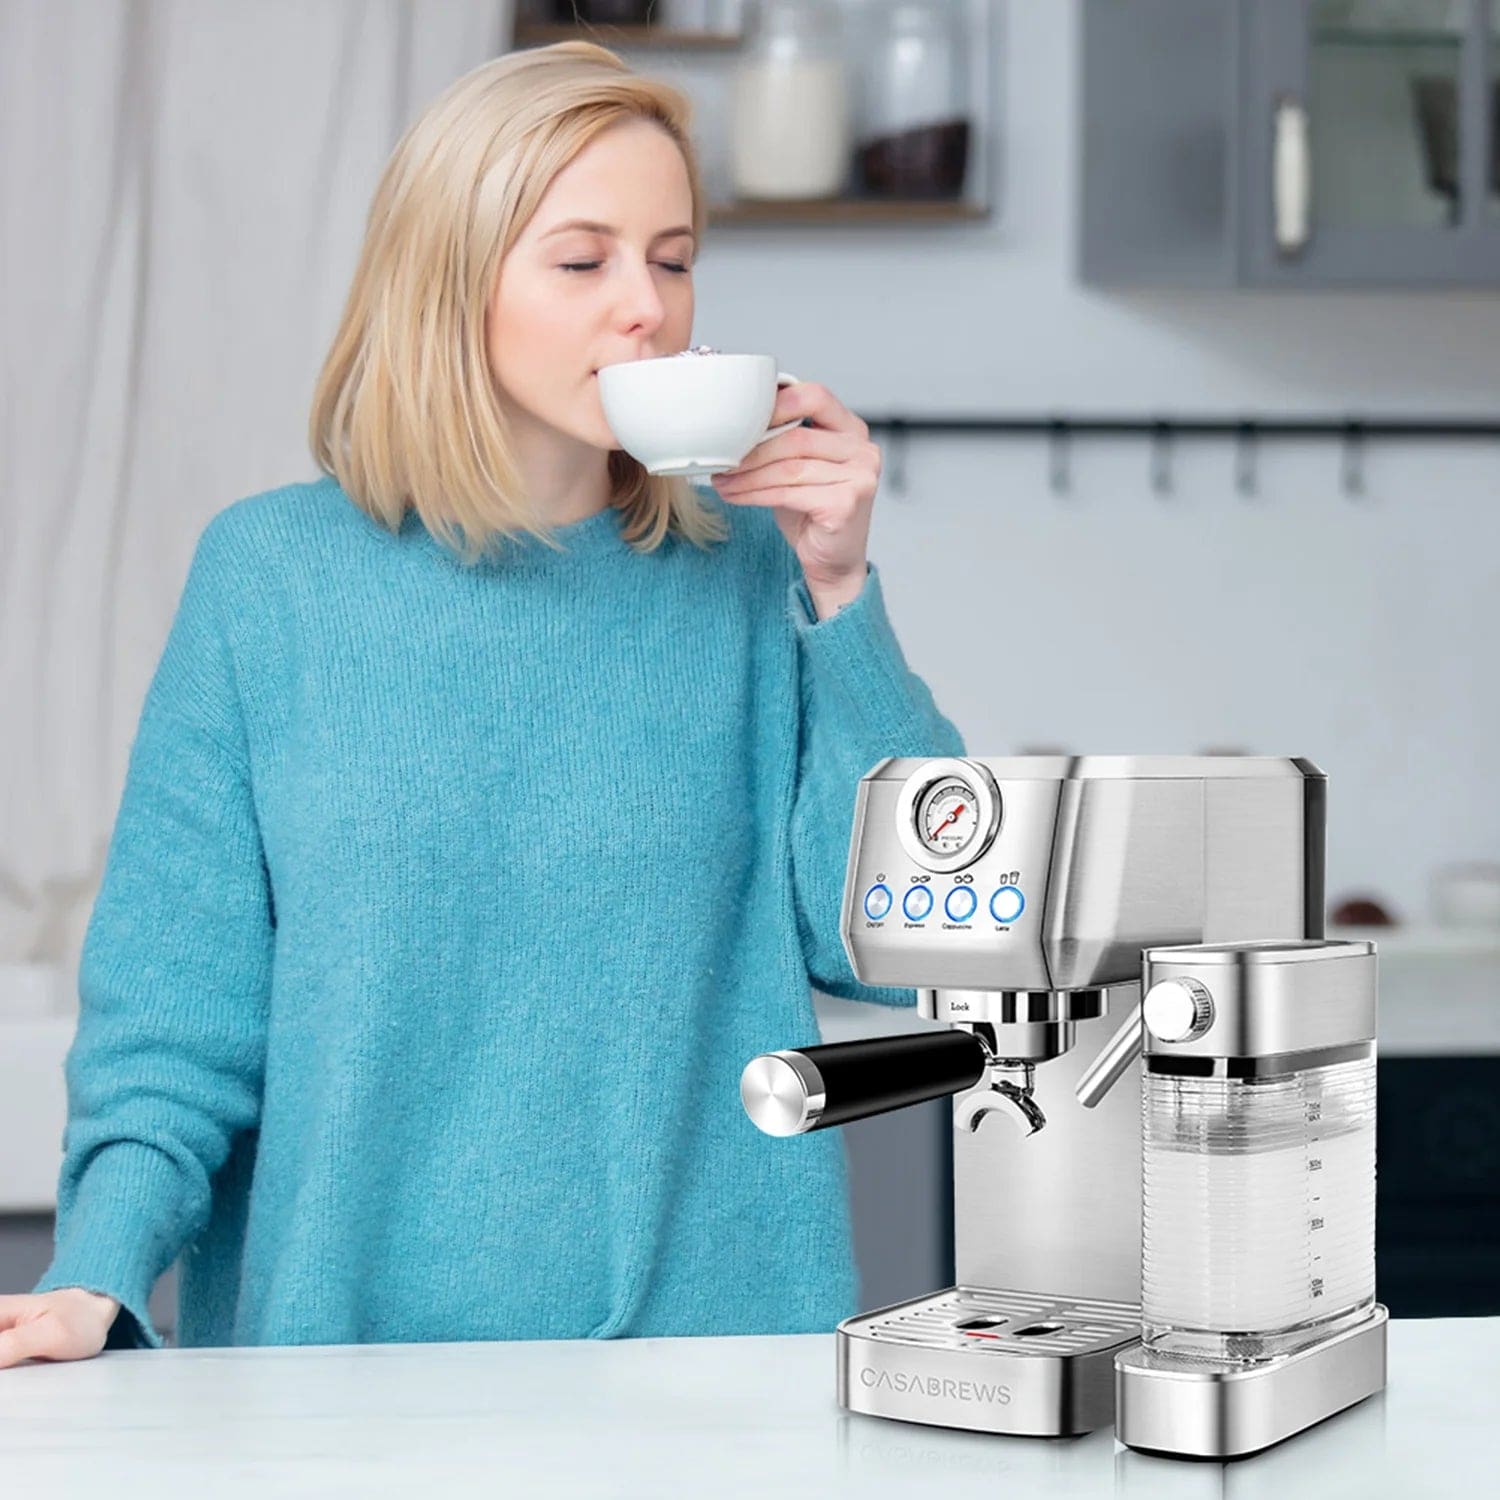 Casabrews 5700Gense™ All-in-One Espresso Machine with Grinding Memory  Function